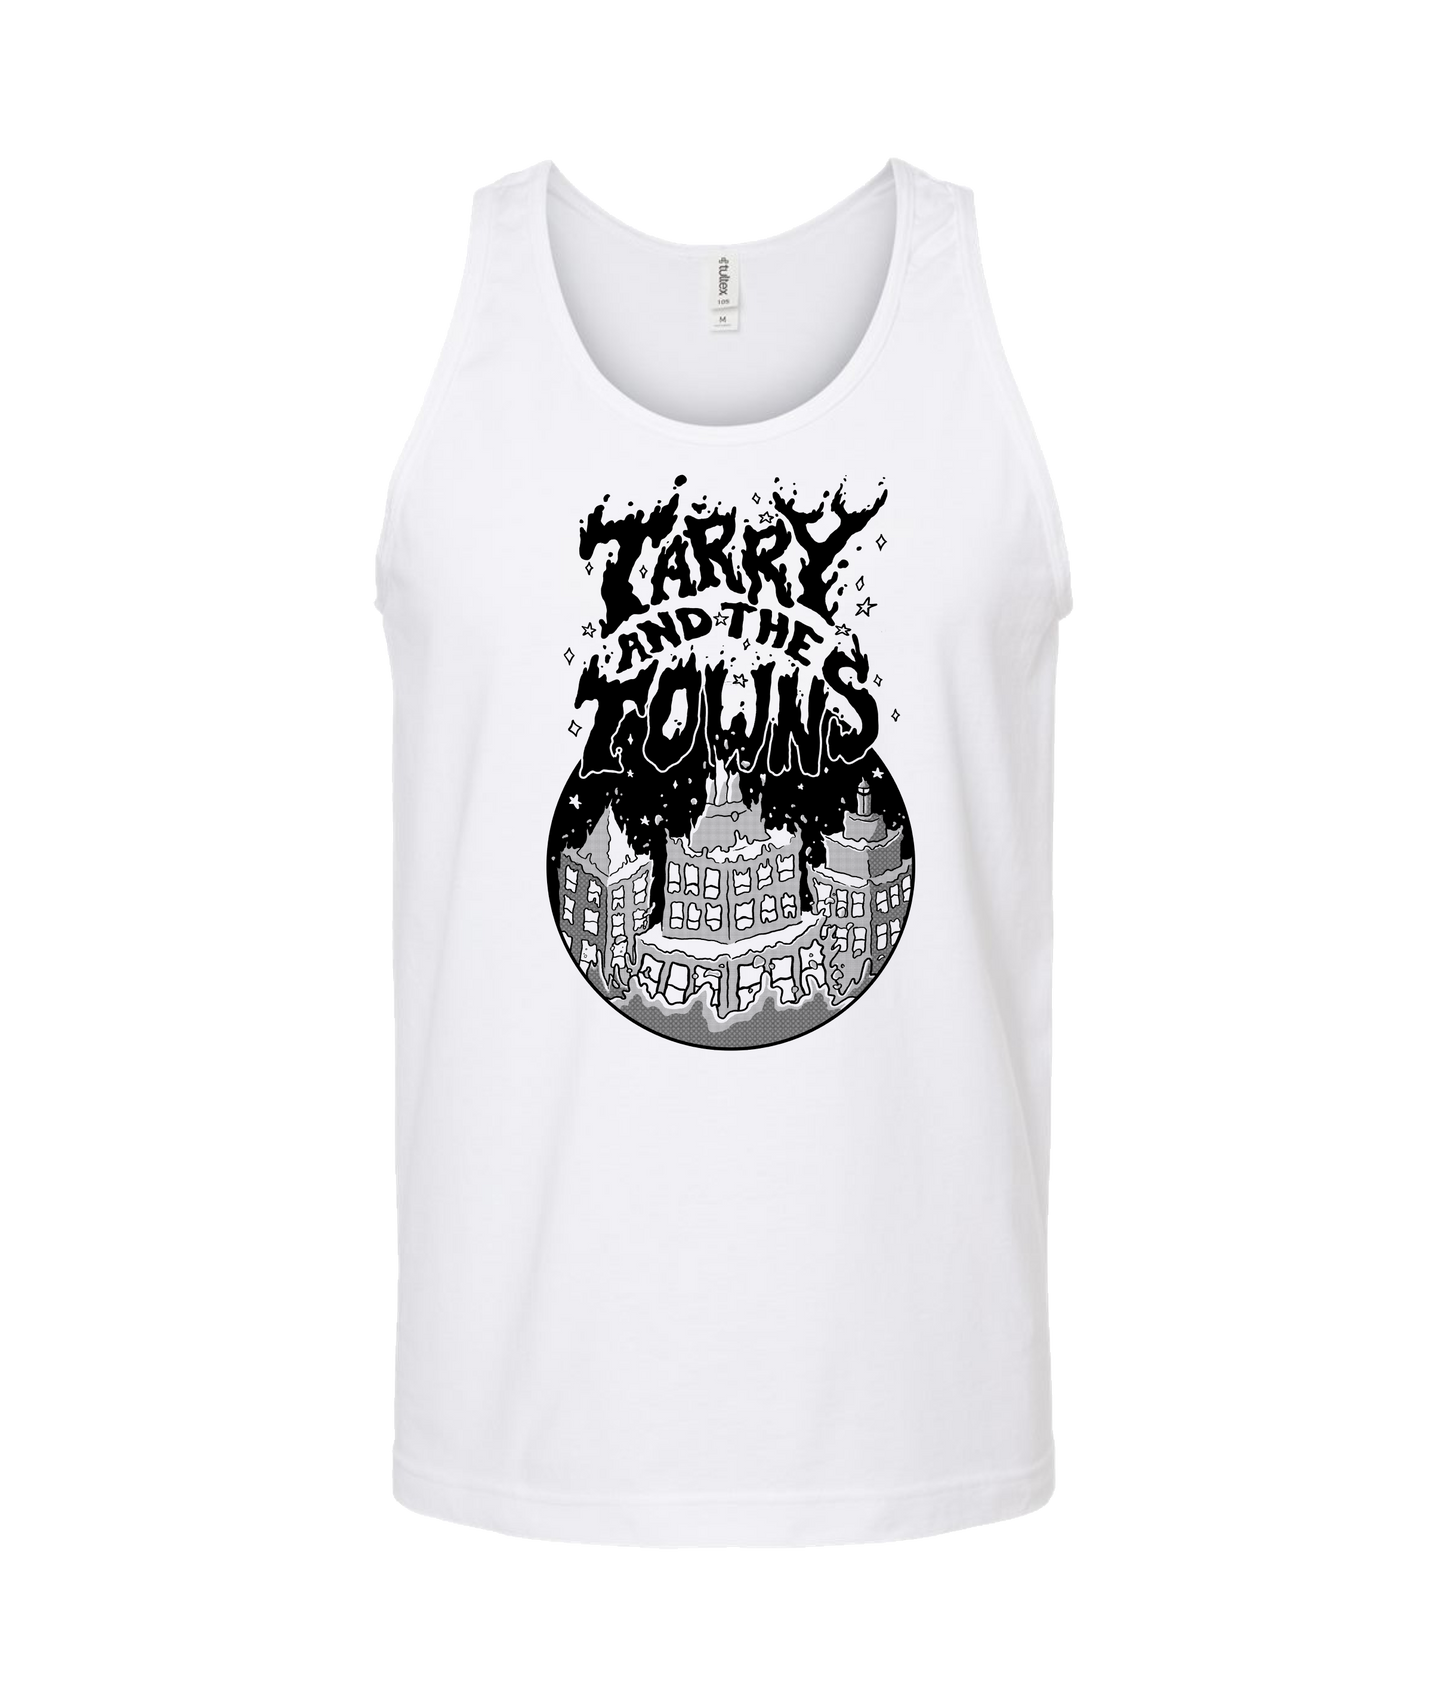 Tarry and the Towns - Inky - White Tank Top